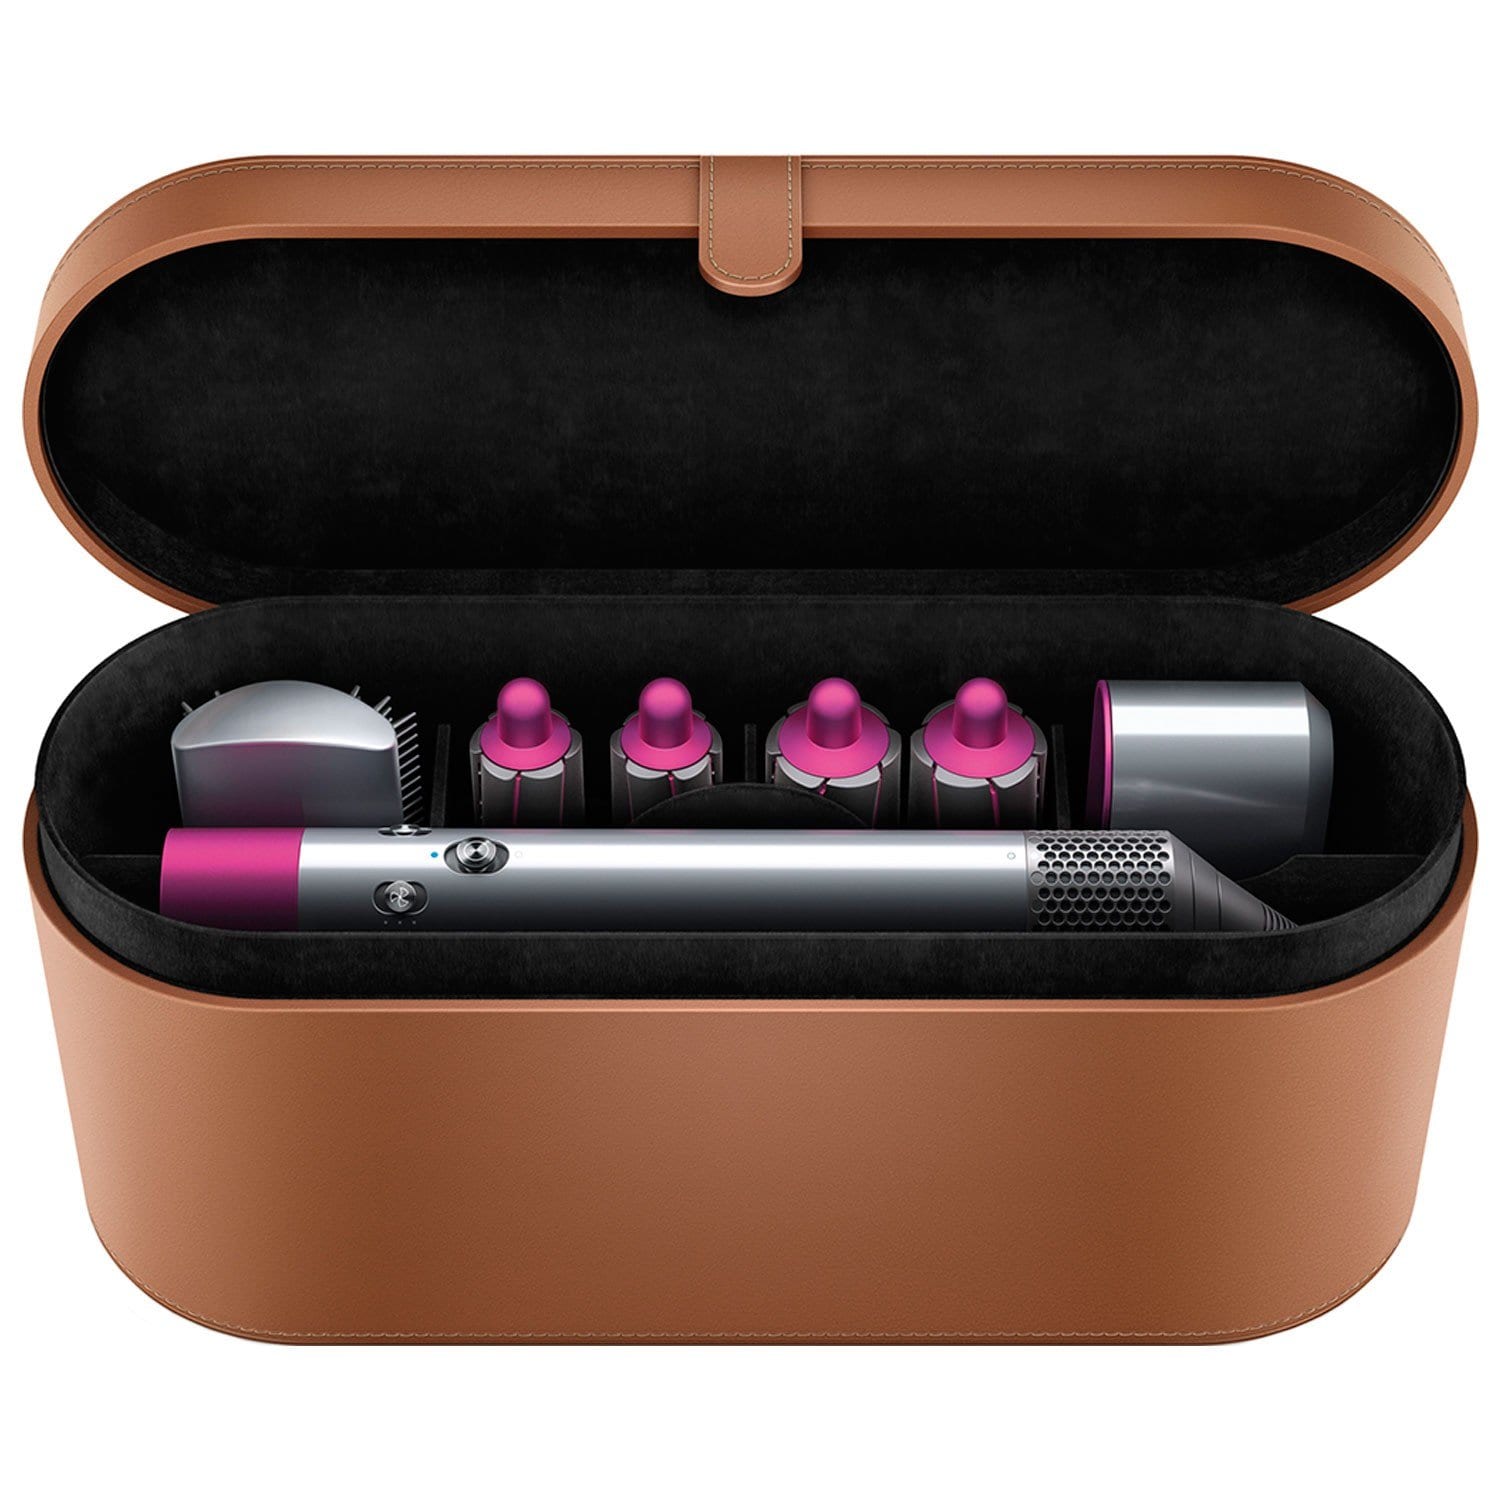 hair curlers and accessories in a tan leather box